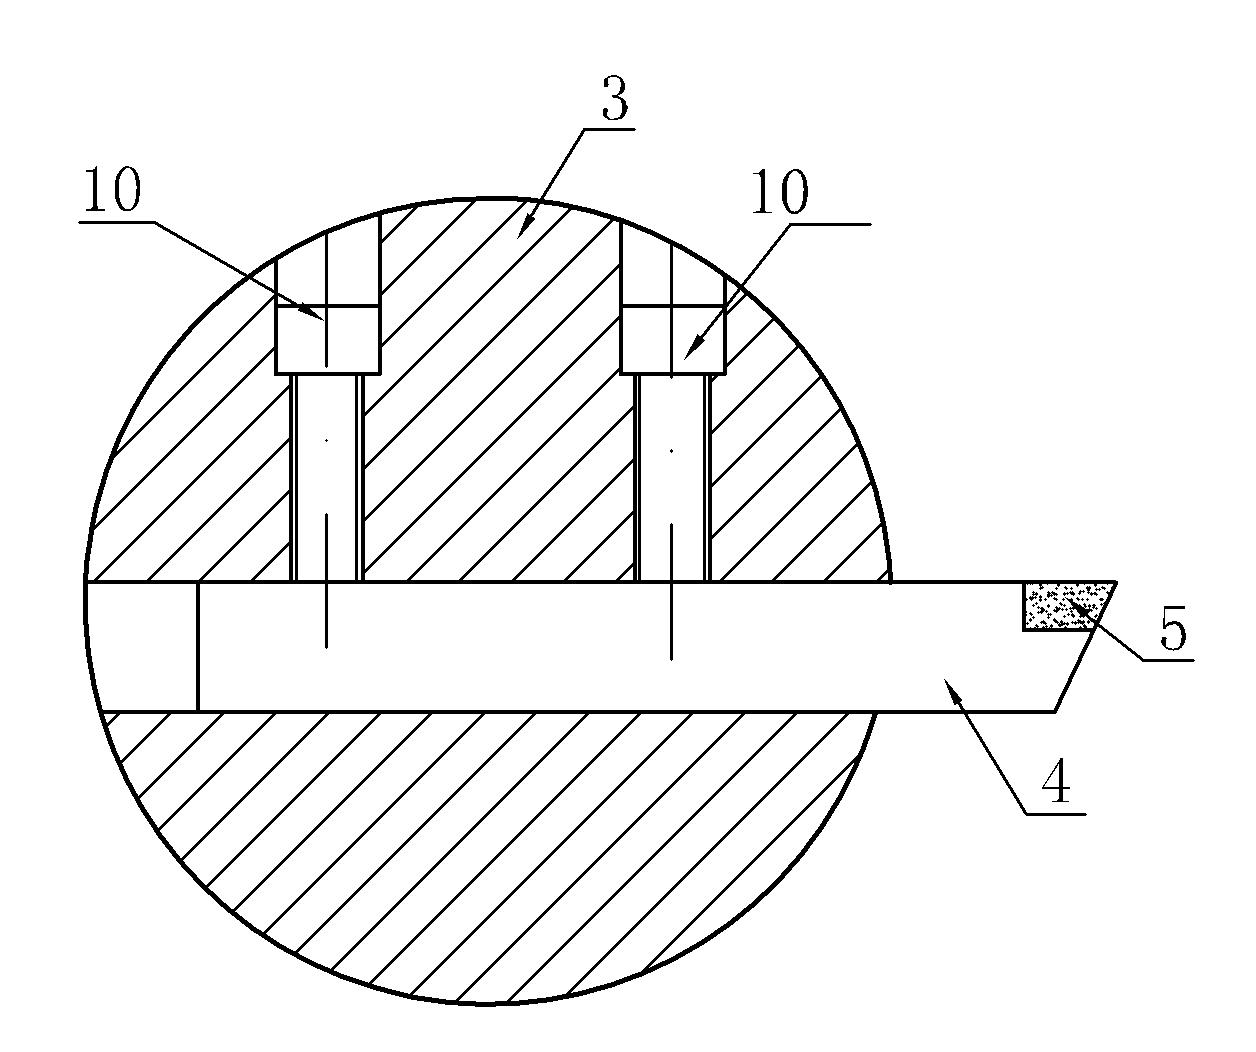 Rough and fine boring device for processing cutter bar with step holes at two ends